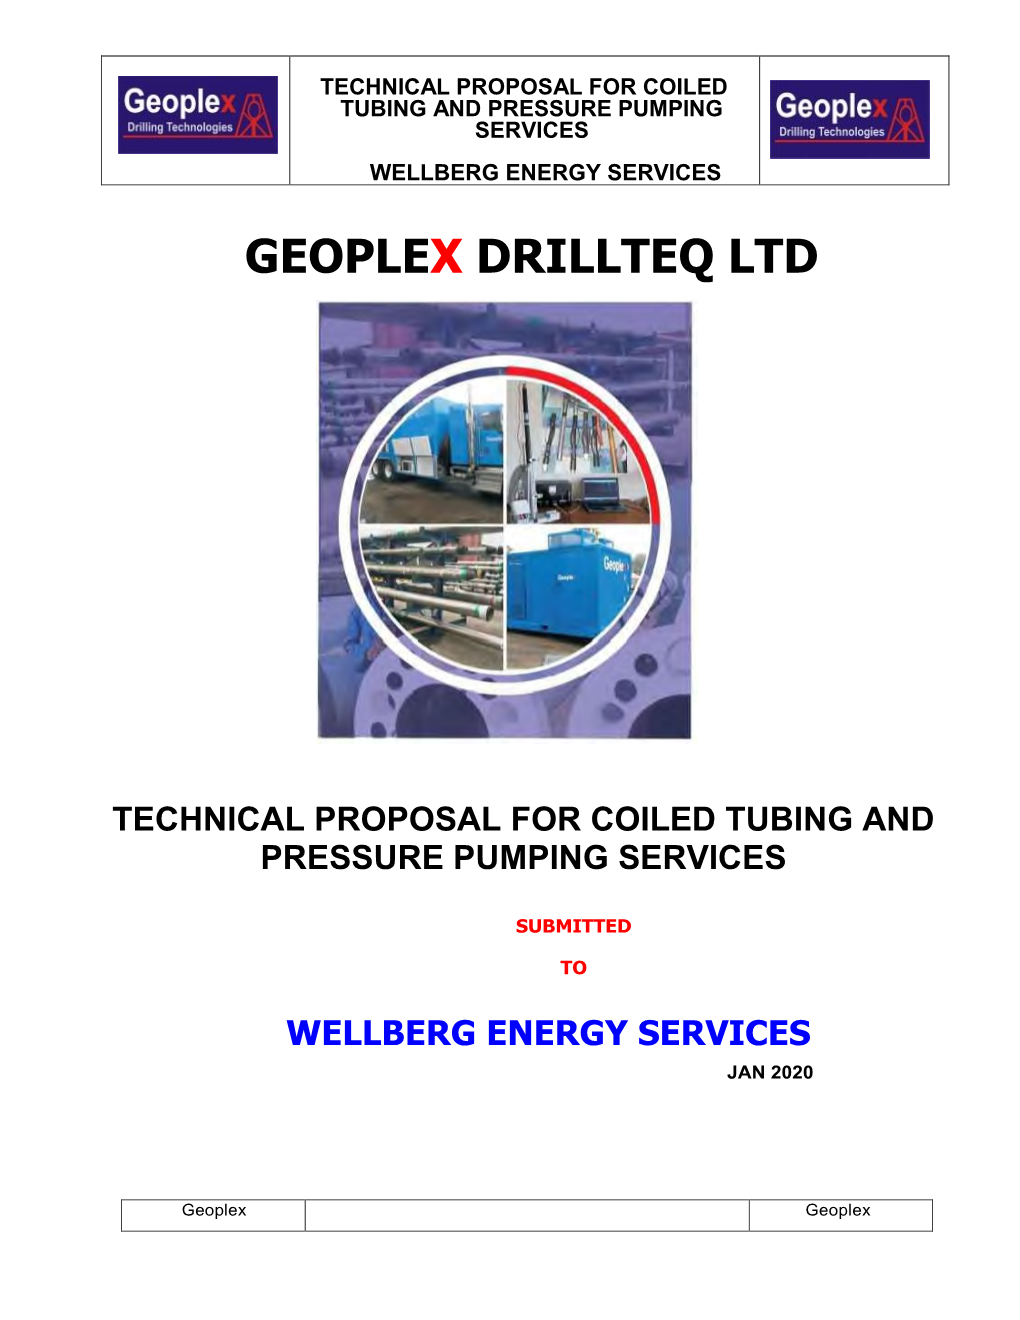 Geoplex Drillteq Ltd Technical Proposal for Coiled Tubing and Pressure